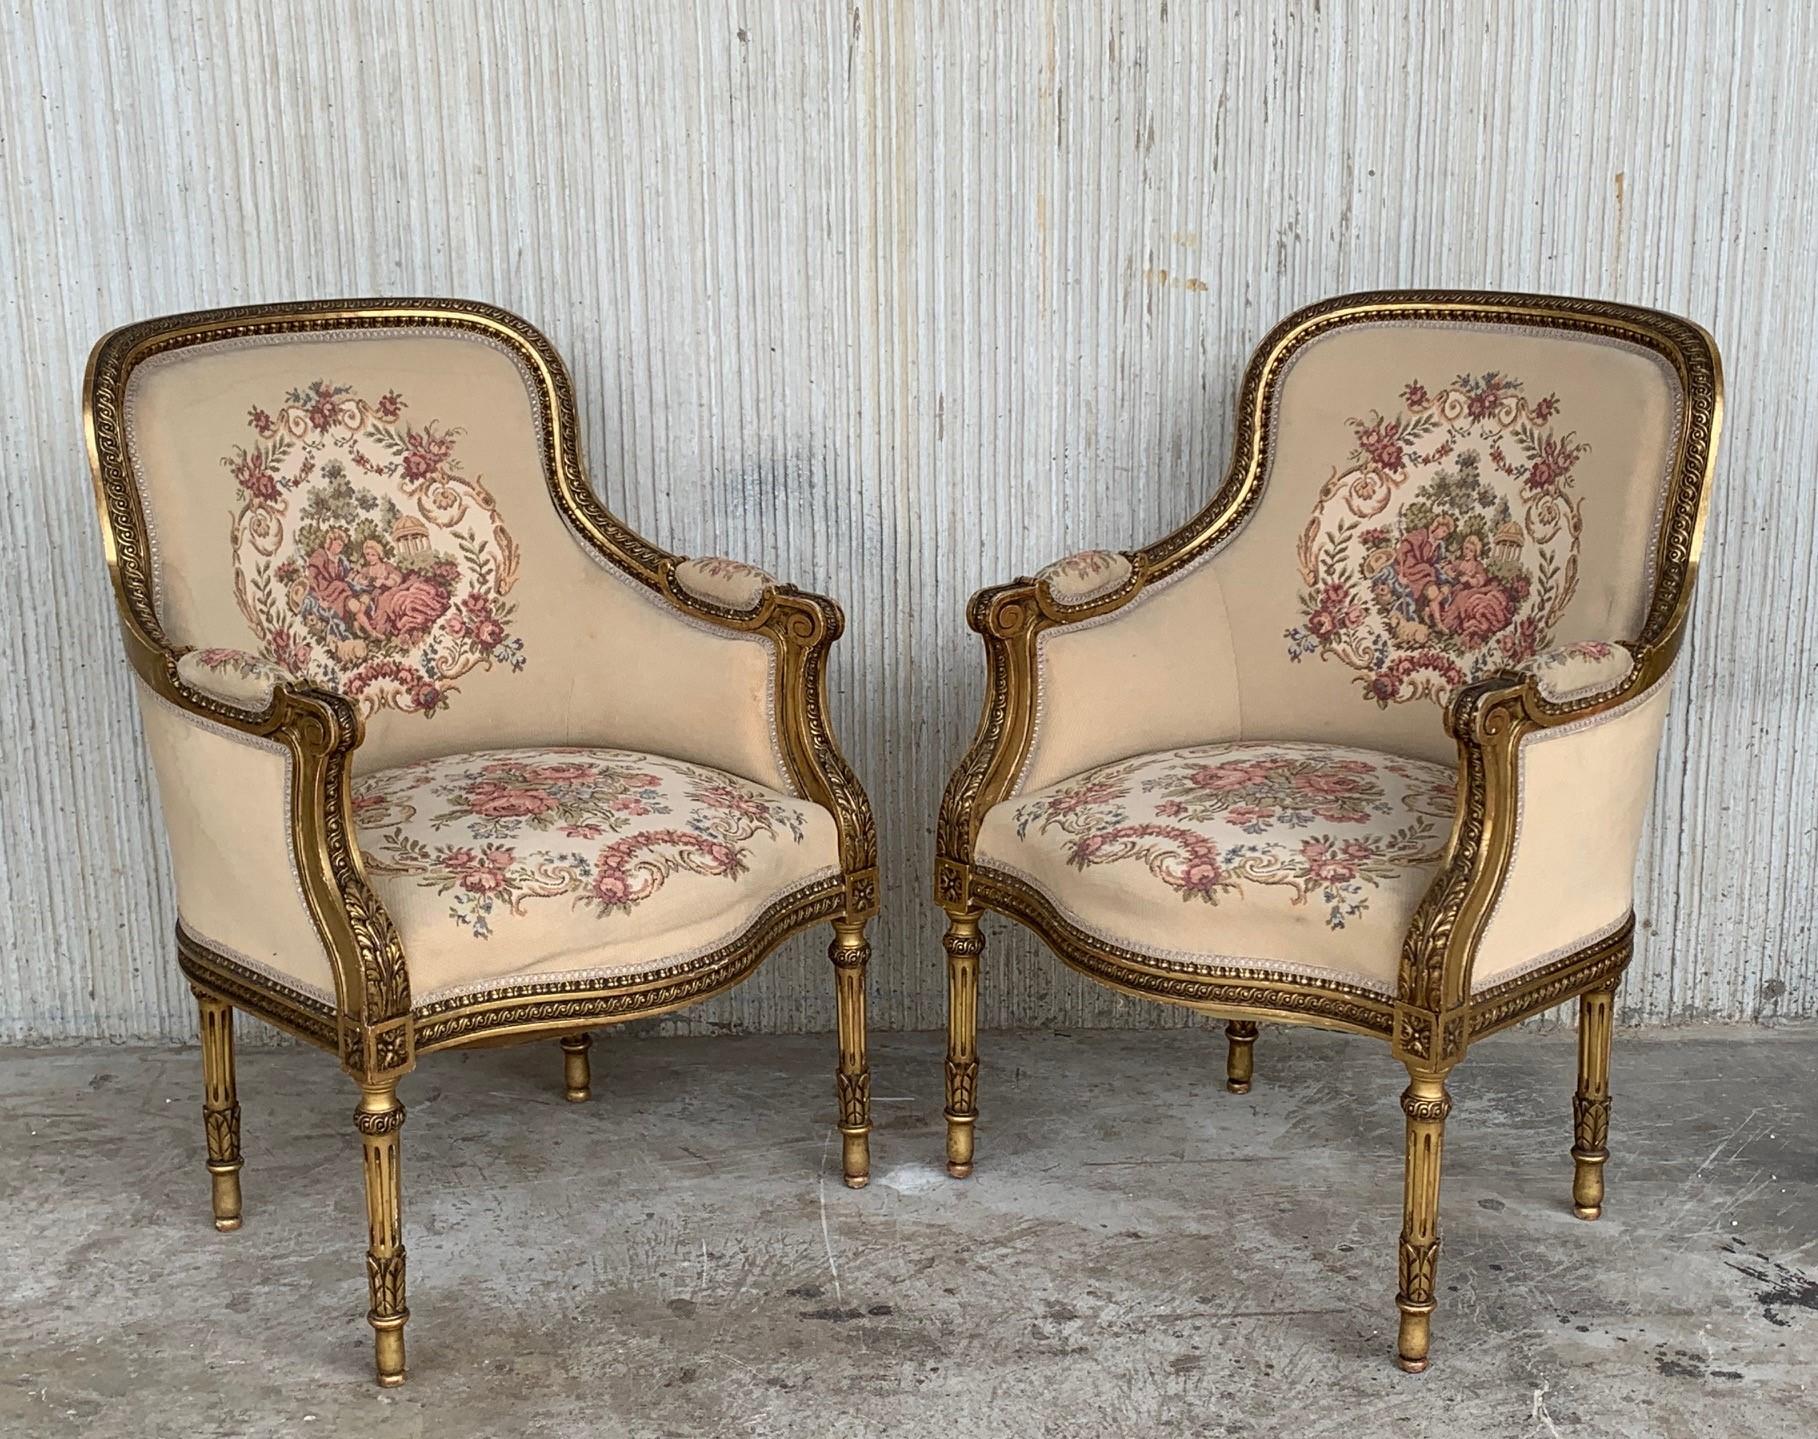 French Louis XVI Giltwood Bergère Armchairs with Original Fabric, circa 1800